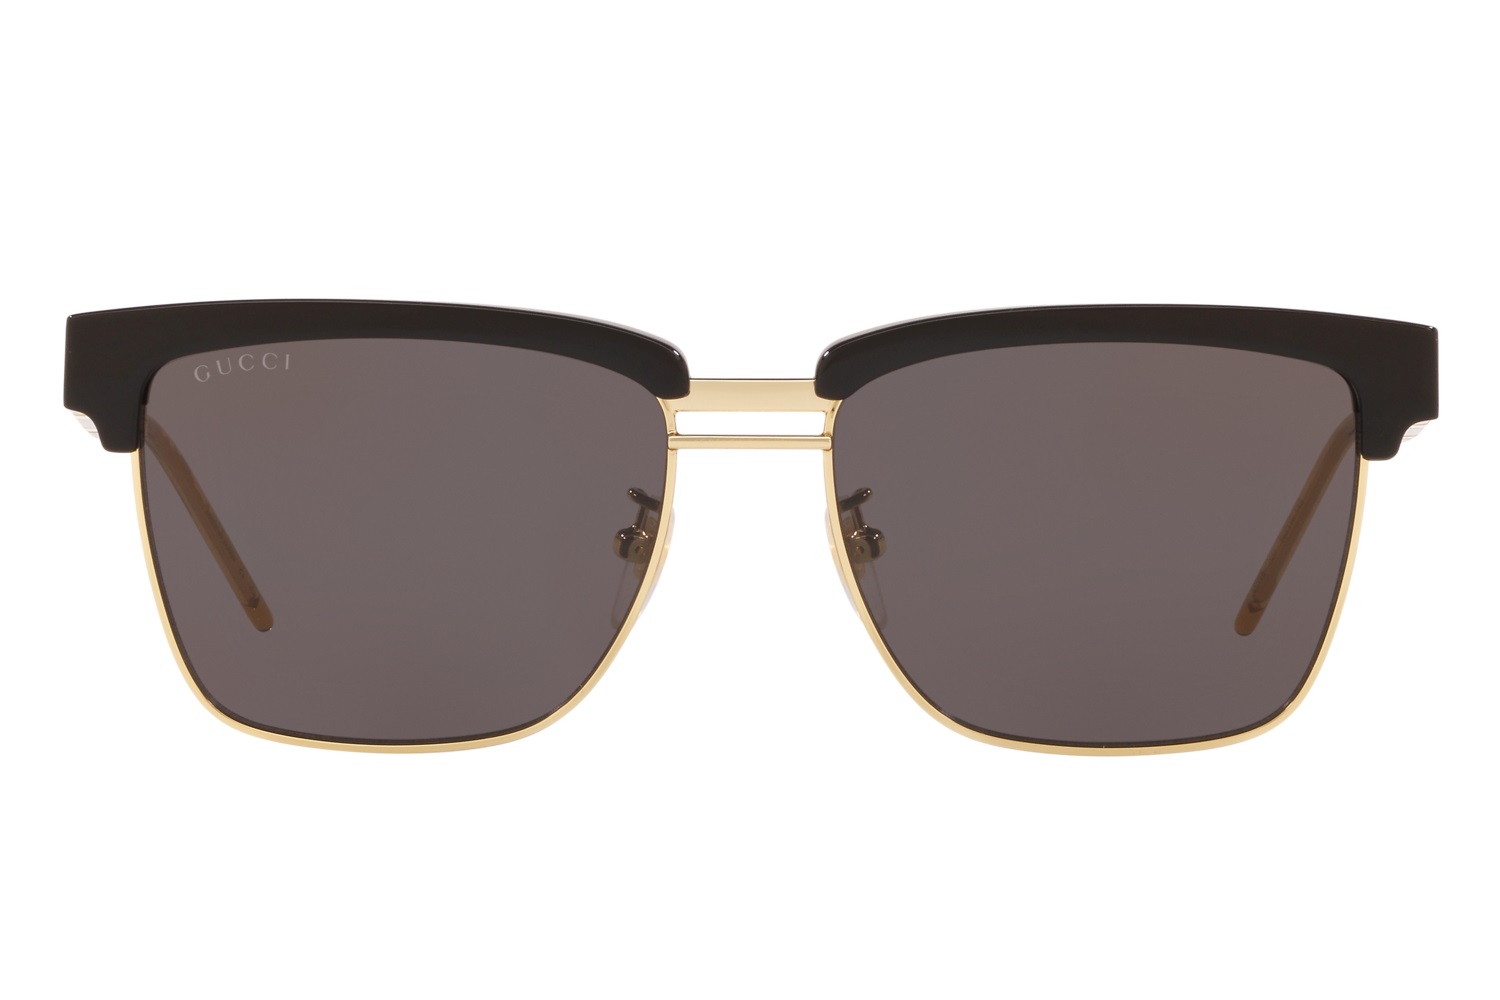 The 12 Best Sunglasses for Men for 2022 - The Manual